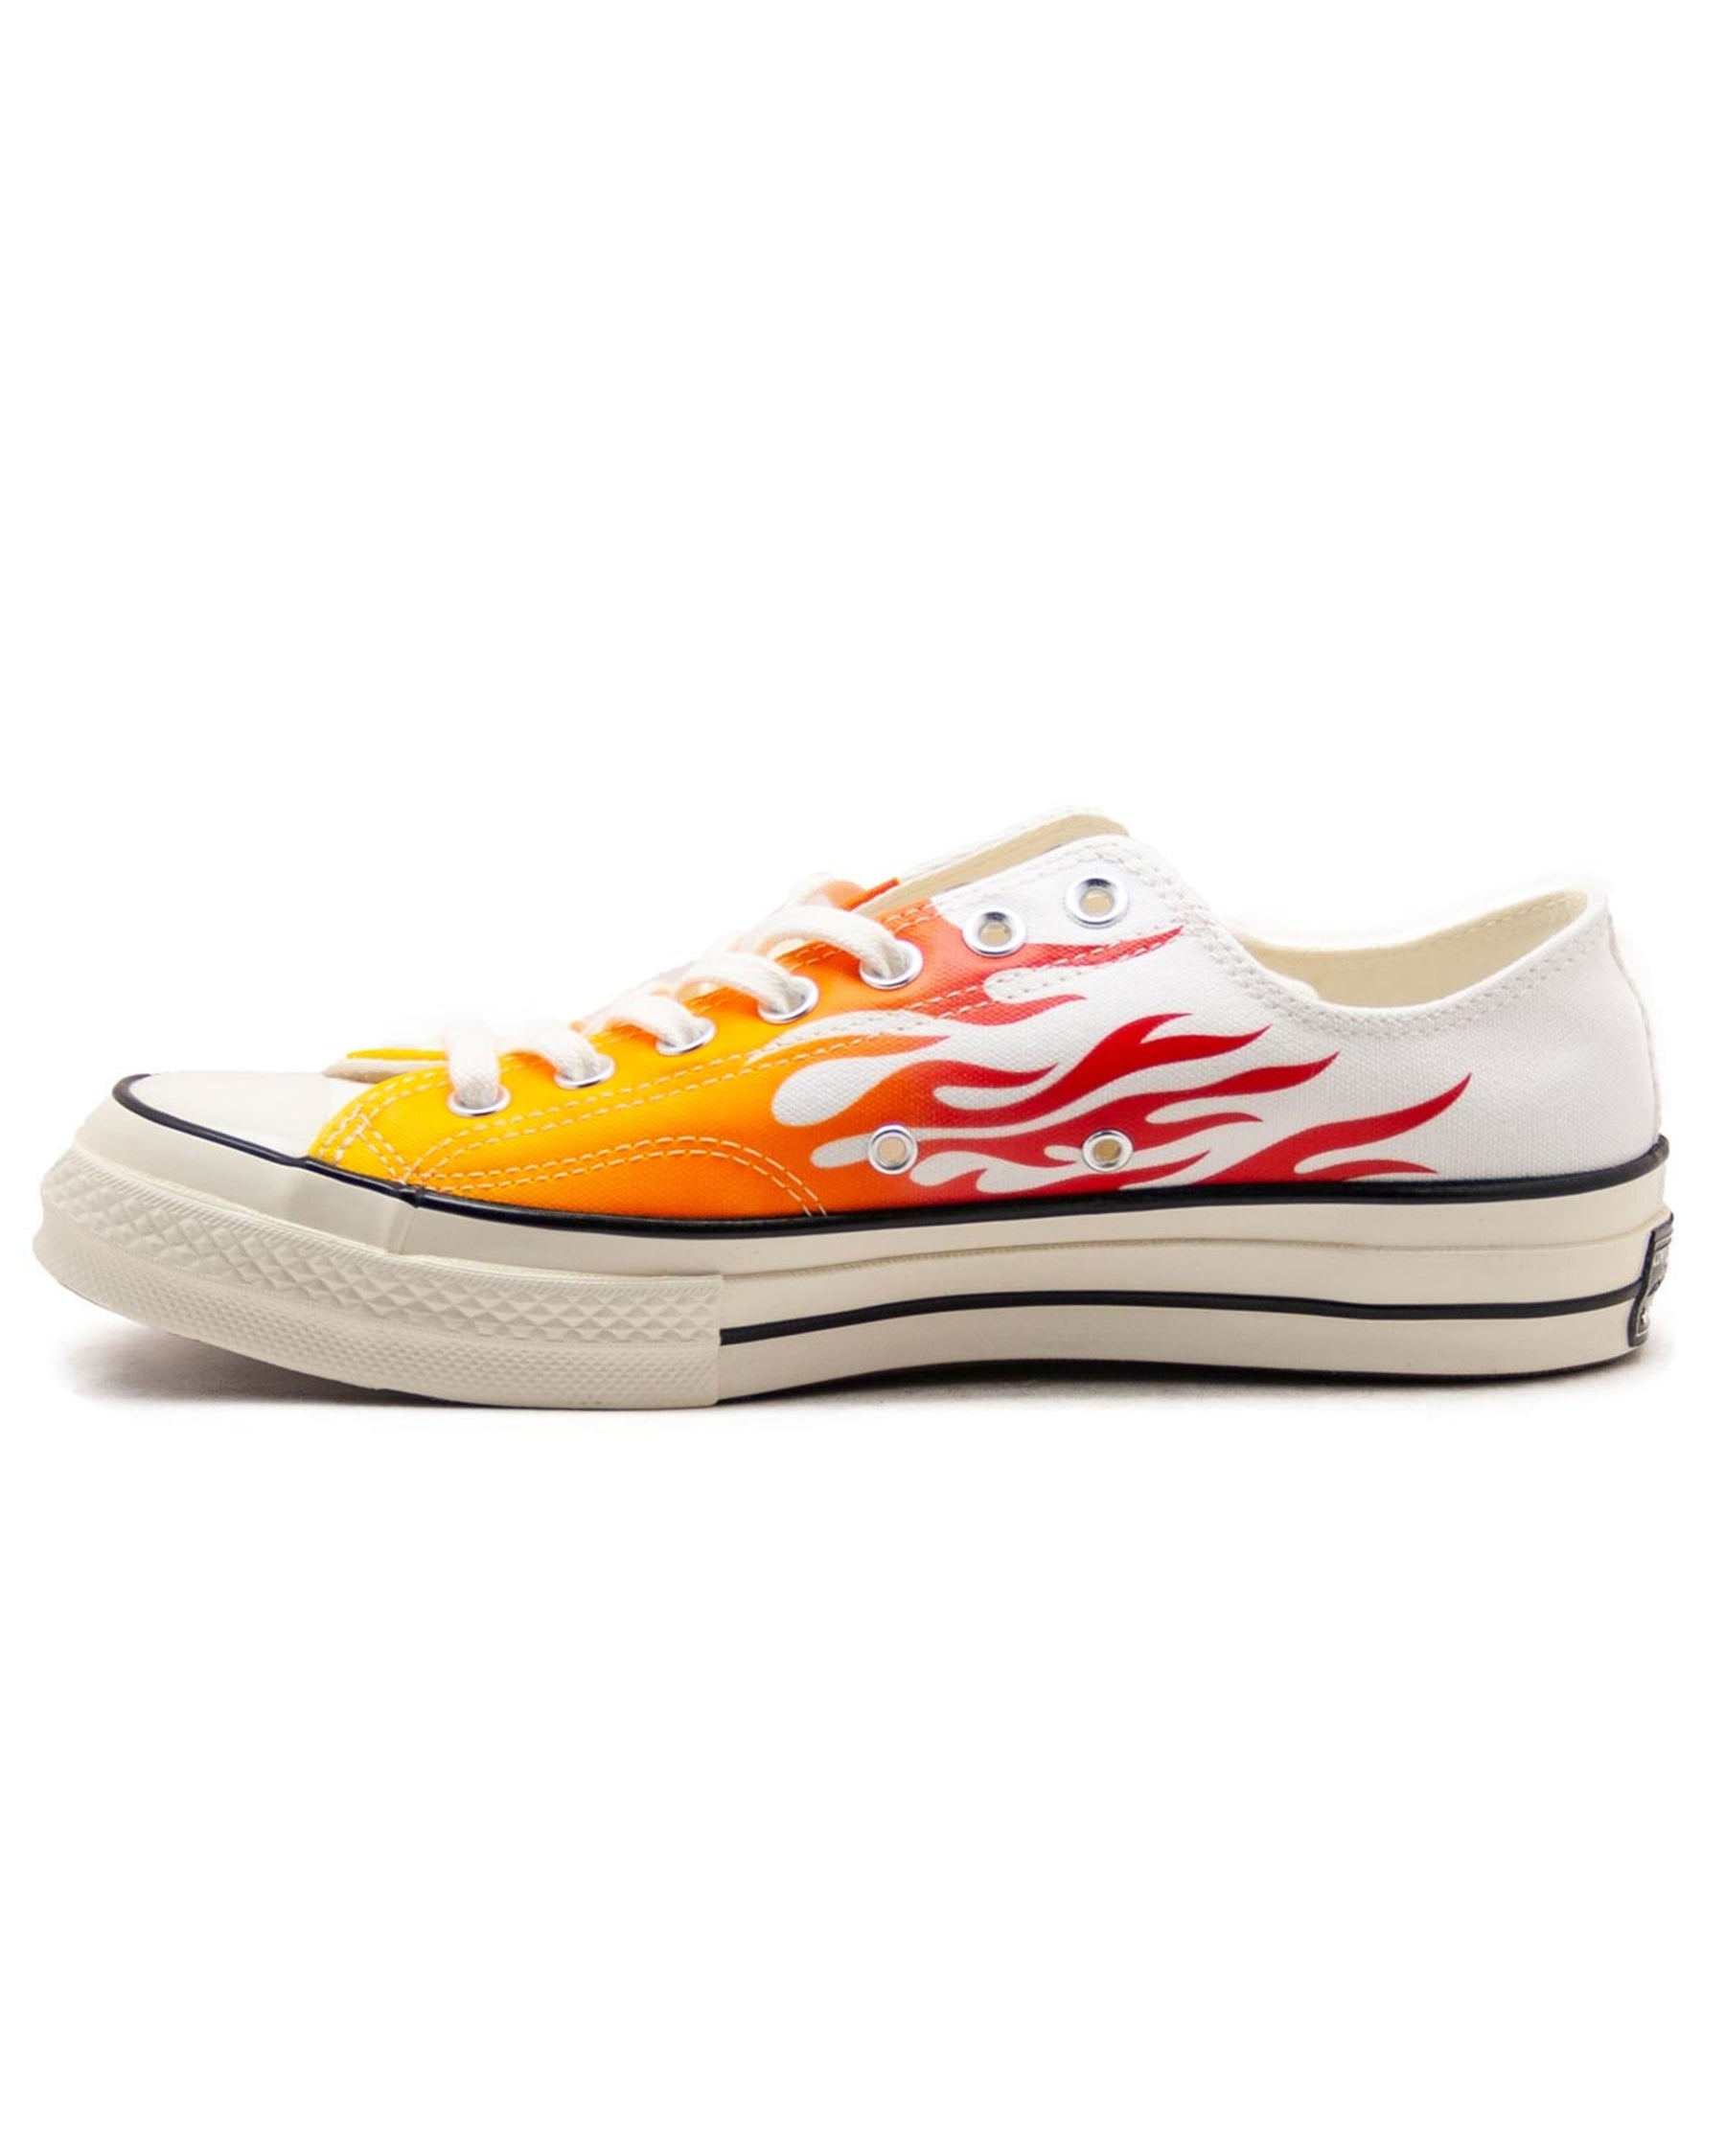 Converse Ct All Star Low '70 Flame 165029C